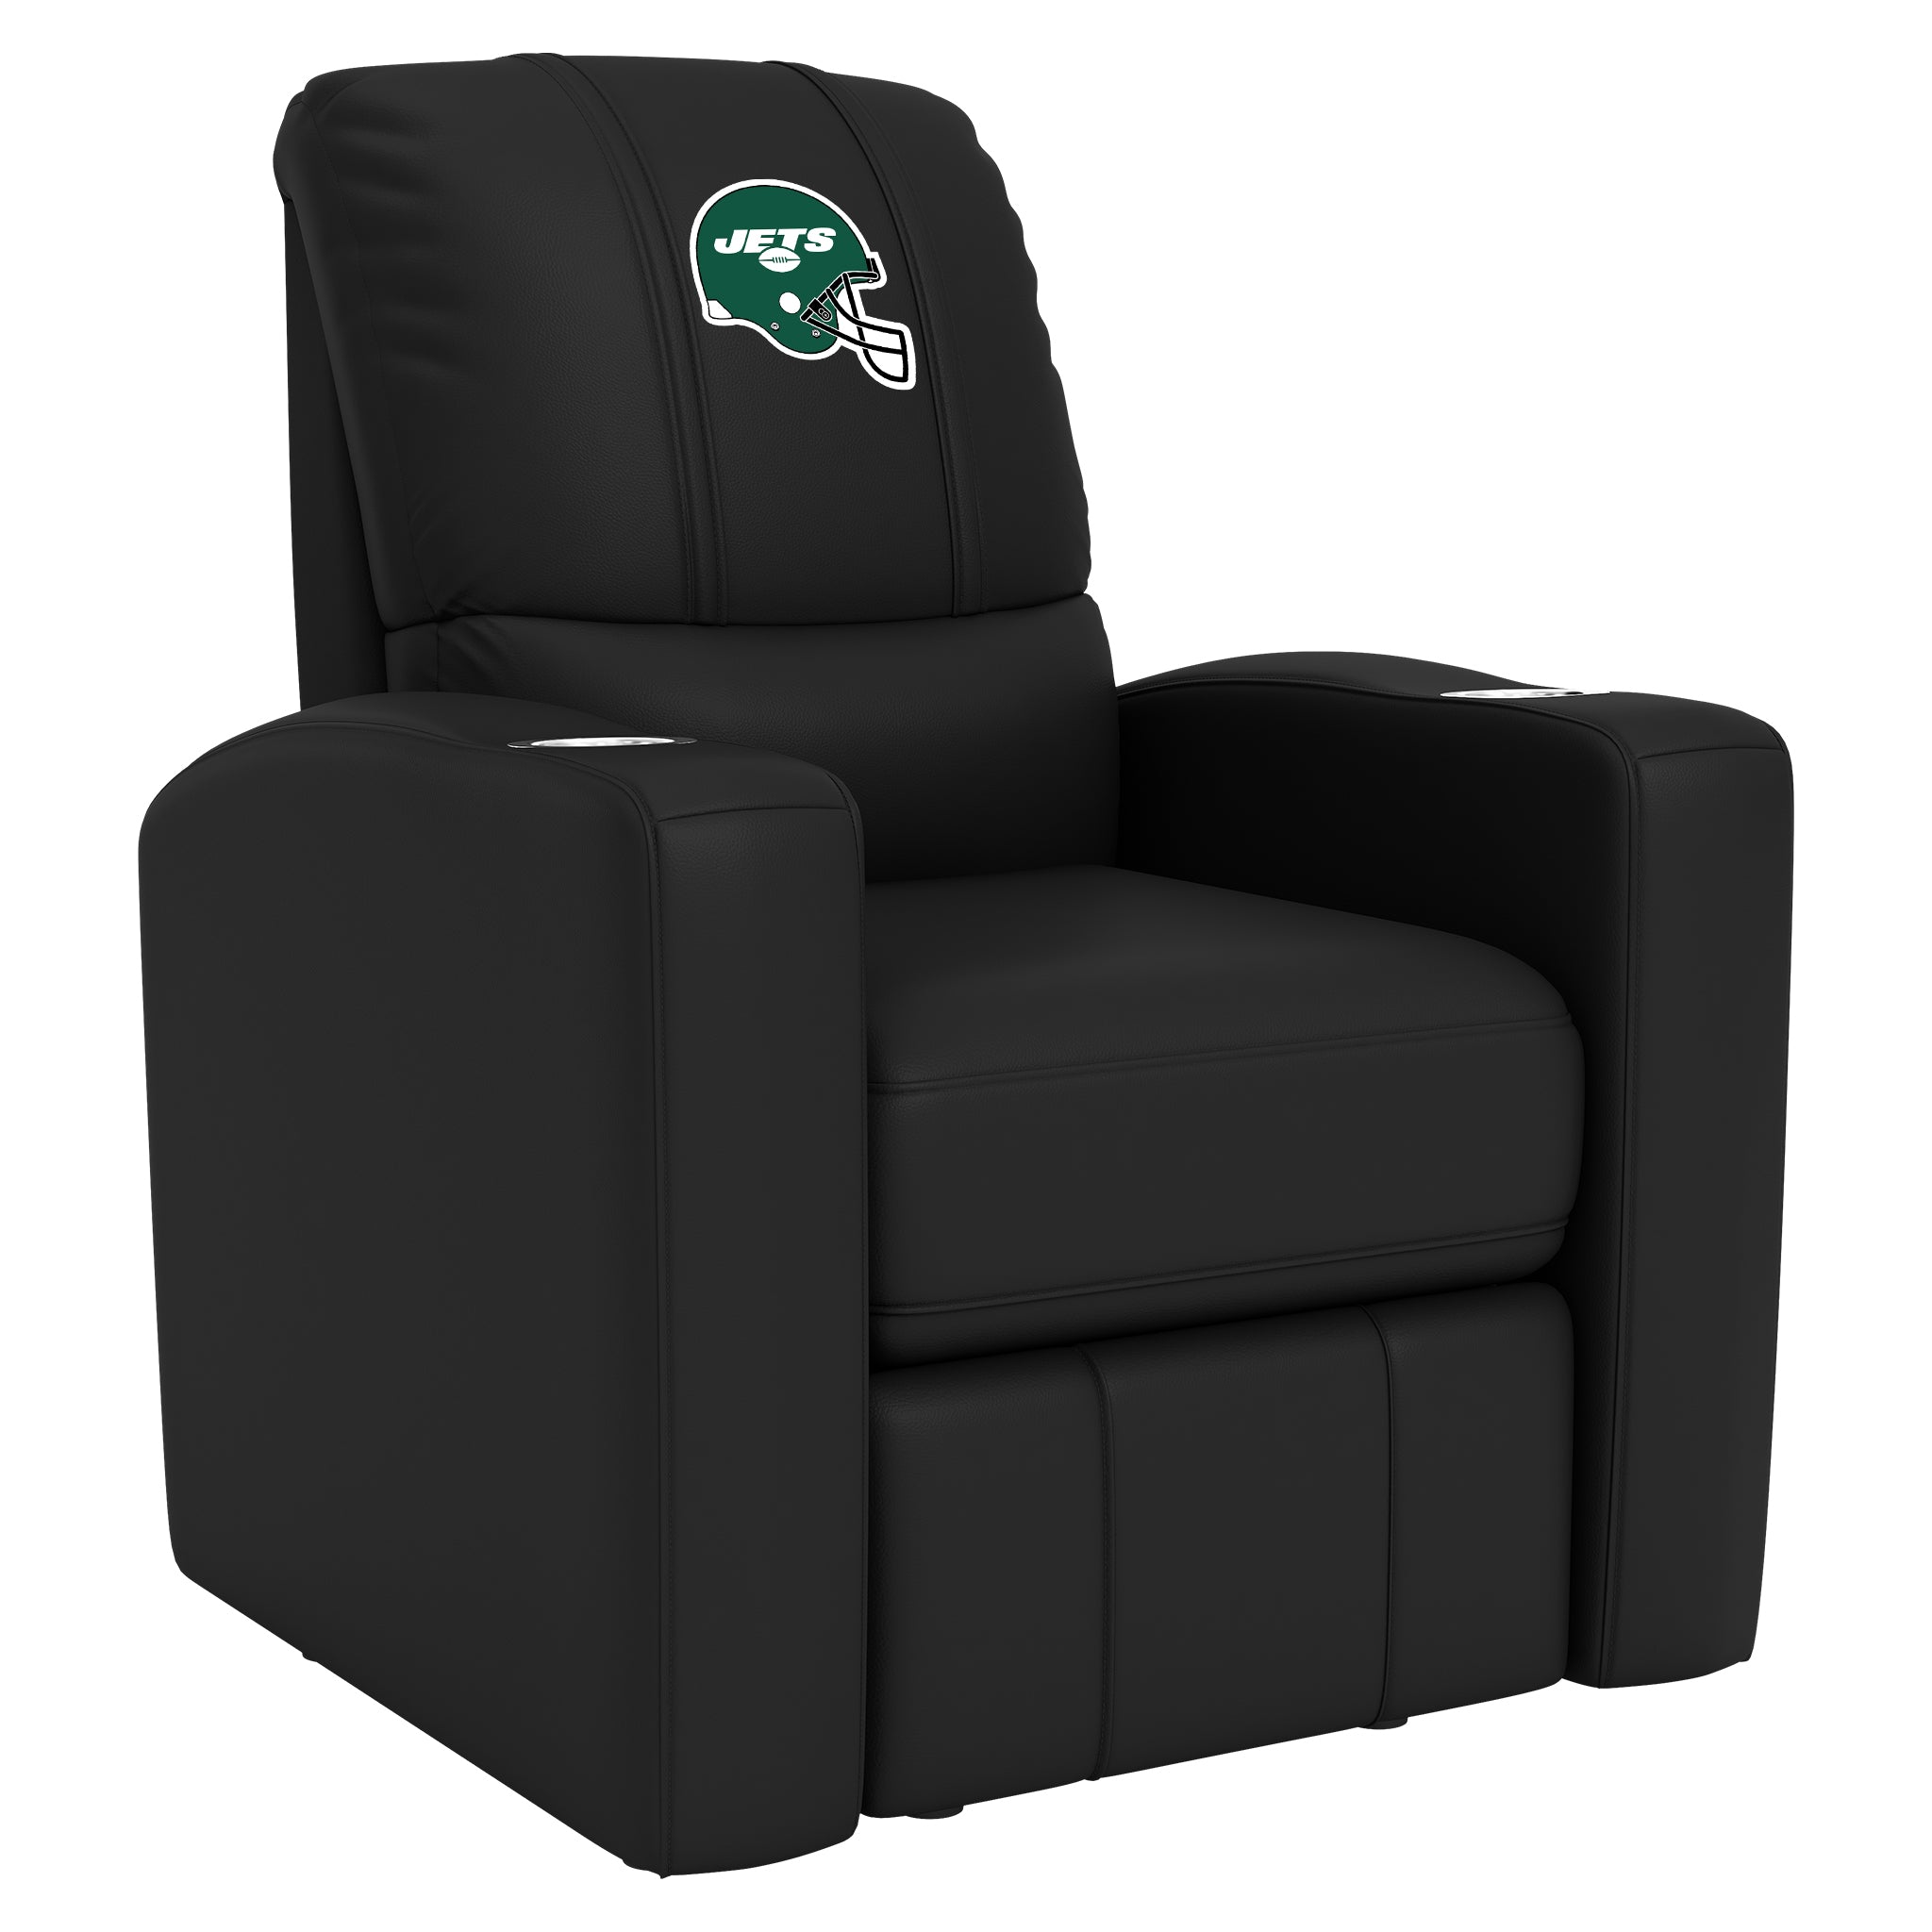 New York Jets Stealth Recliner Manual